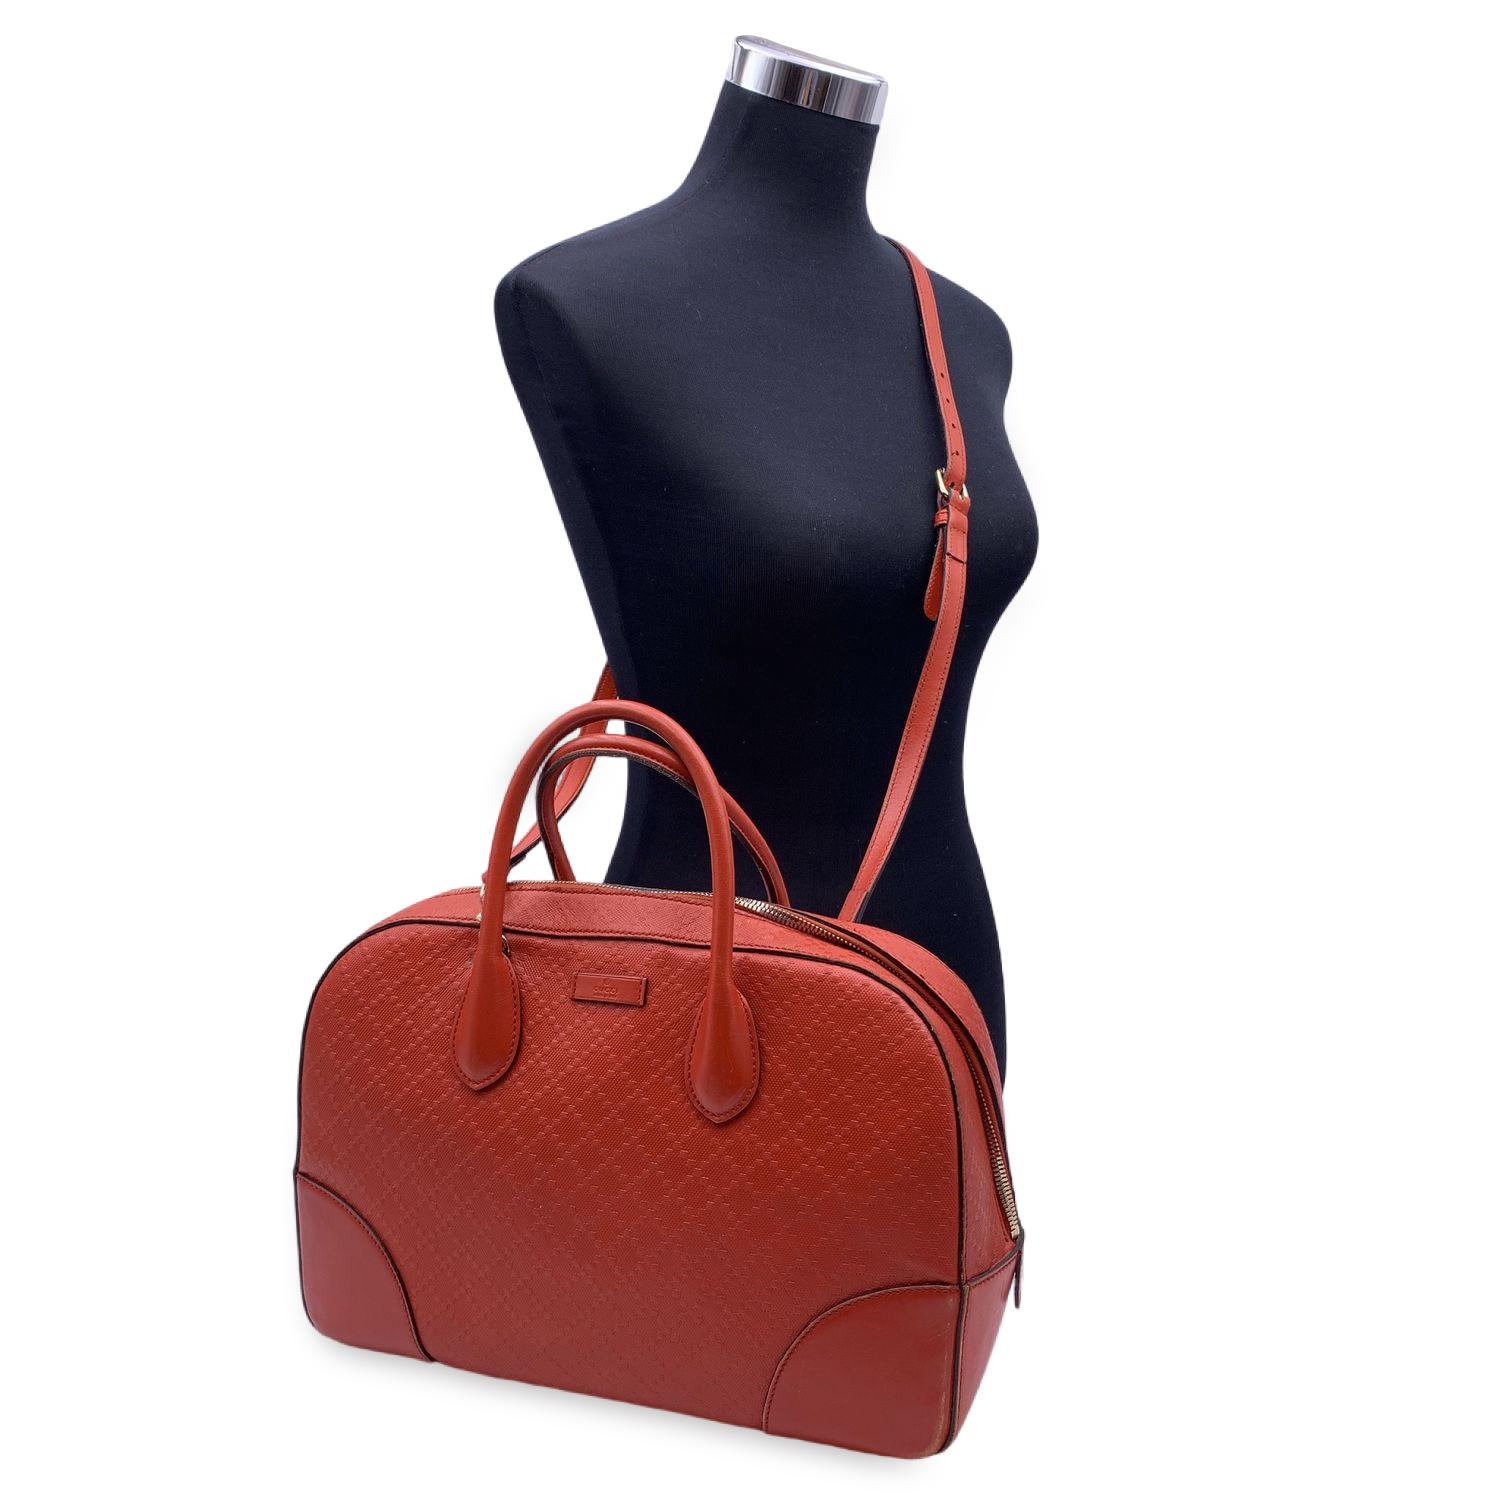 Beautiful Gucci 'Diamante Bright' in red orange leather. Embossed signature Gucci Diamante pattern. Silver metal hardware Double top handles and adjustable and removable shoulder strap. Upper zipper closure. Beige fabric lining. 2 side zip pockets